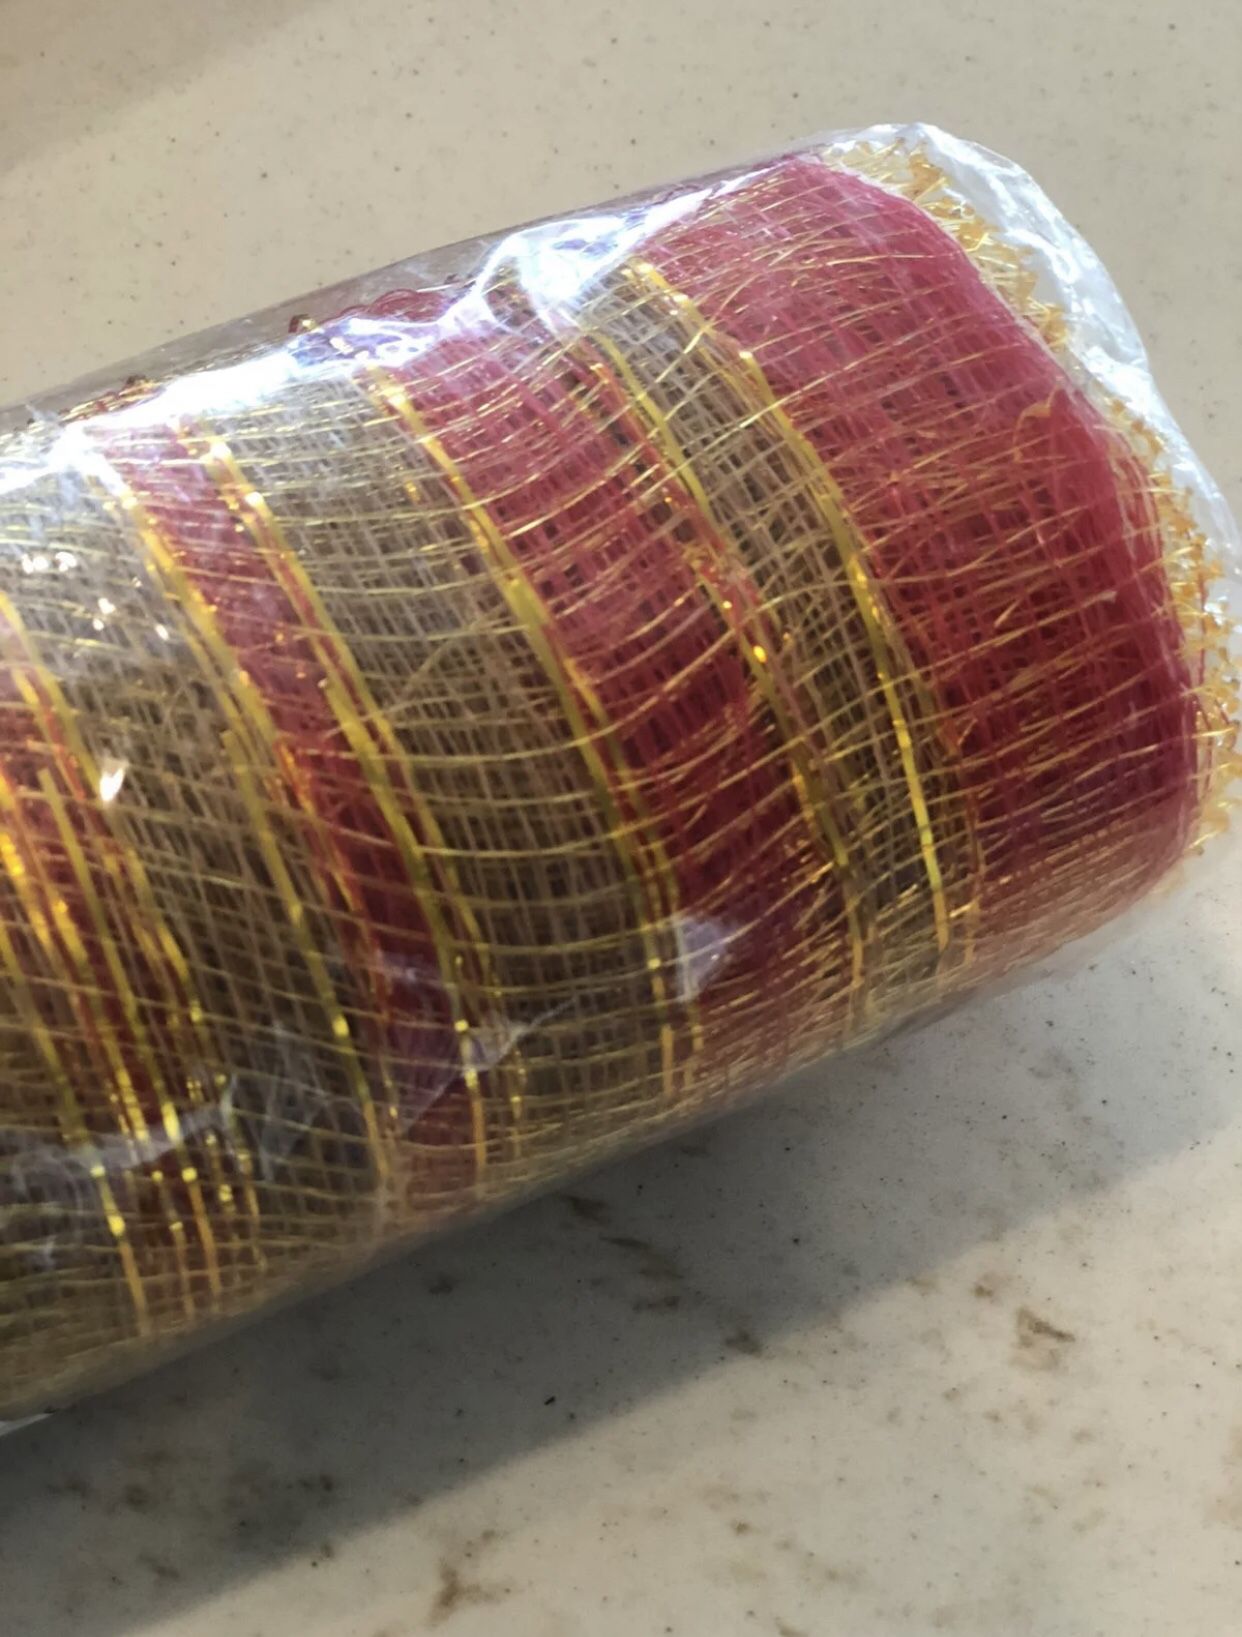 NWT 4 Rolls of 10” X 30’ Orange & Tinsel Gold Stripe Poly Deco Mesh Decor Netting.   Note: The measures are approximation since no measurements are pr